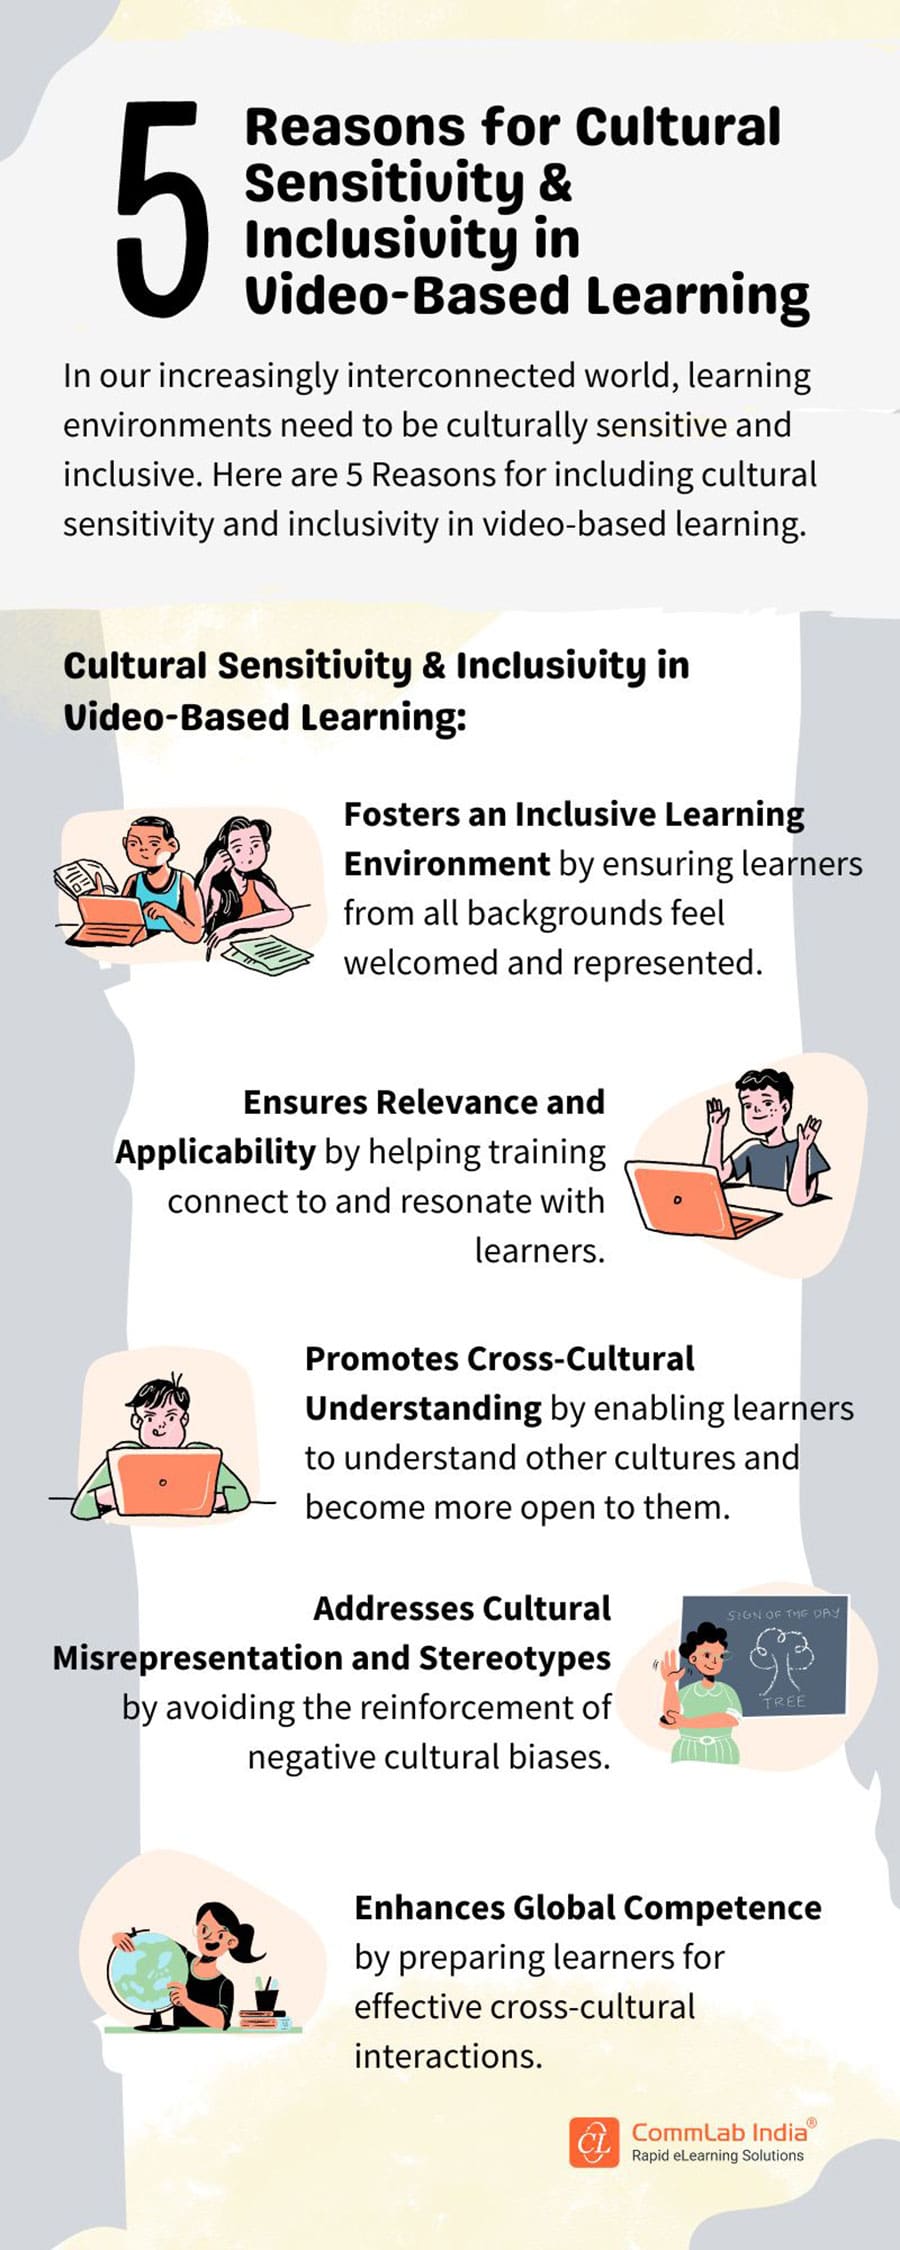 5 Reasons for Cultural Sensitivity and Inclusivity in Video-based Learning